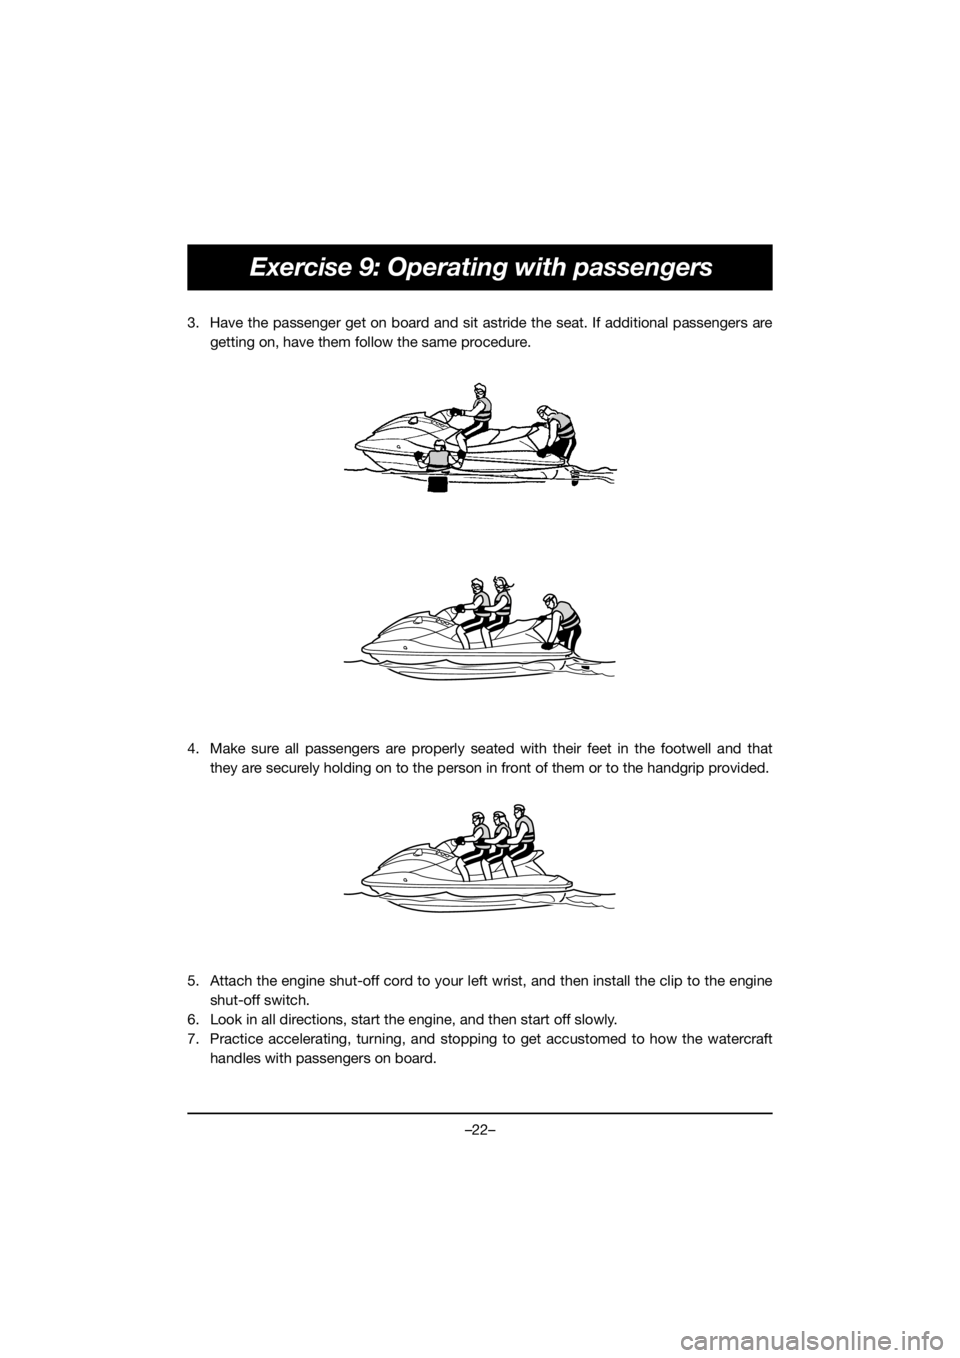 YAMAHA EX SPORT 2020  Manuale duso (in Italian) –22–
Exercise 9: Operating with passengers
3. Have the passenger get on board and sit astride the seat. If additional passengers are
getting on, have them follow the same procedure. 
4. Make sure 